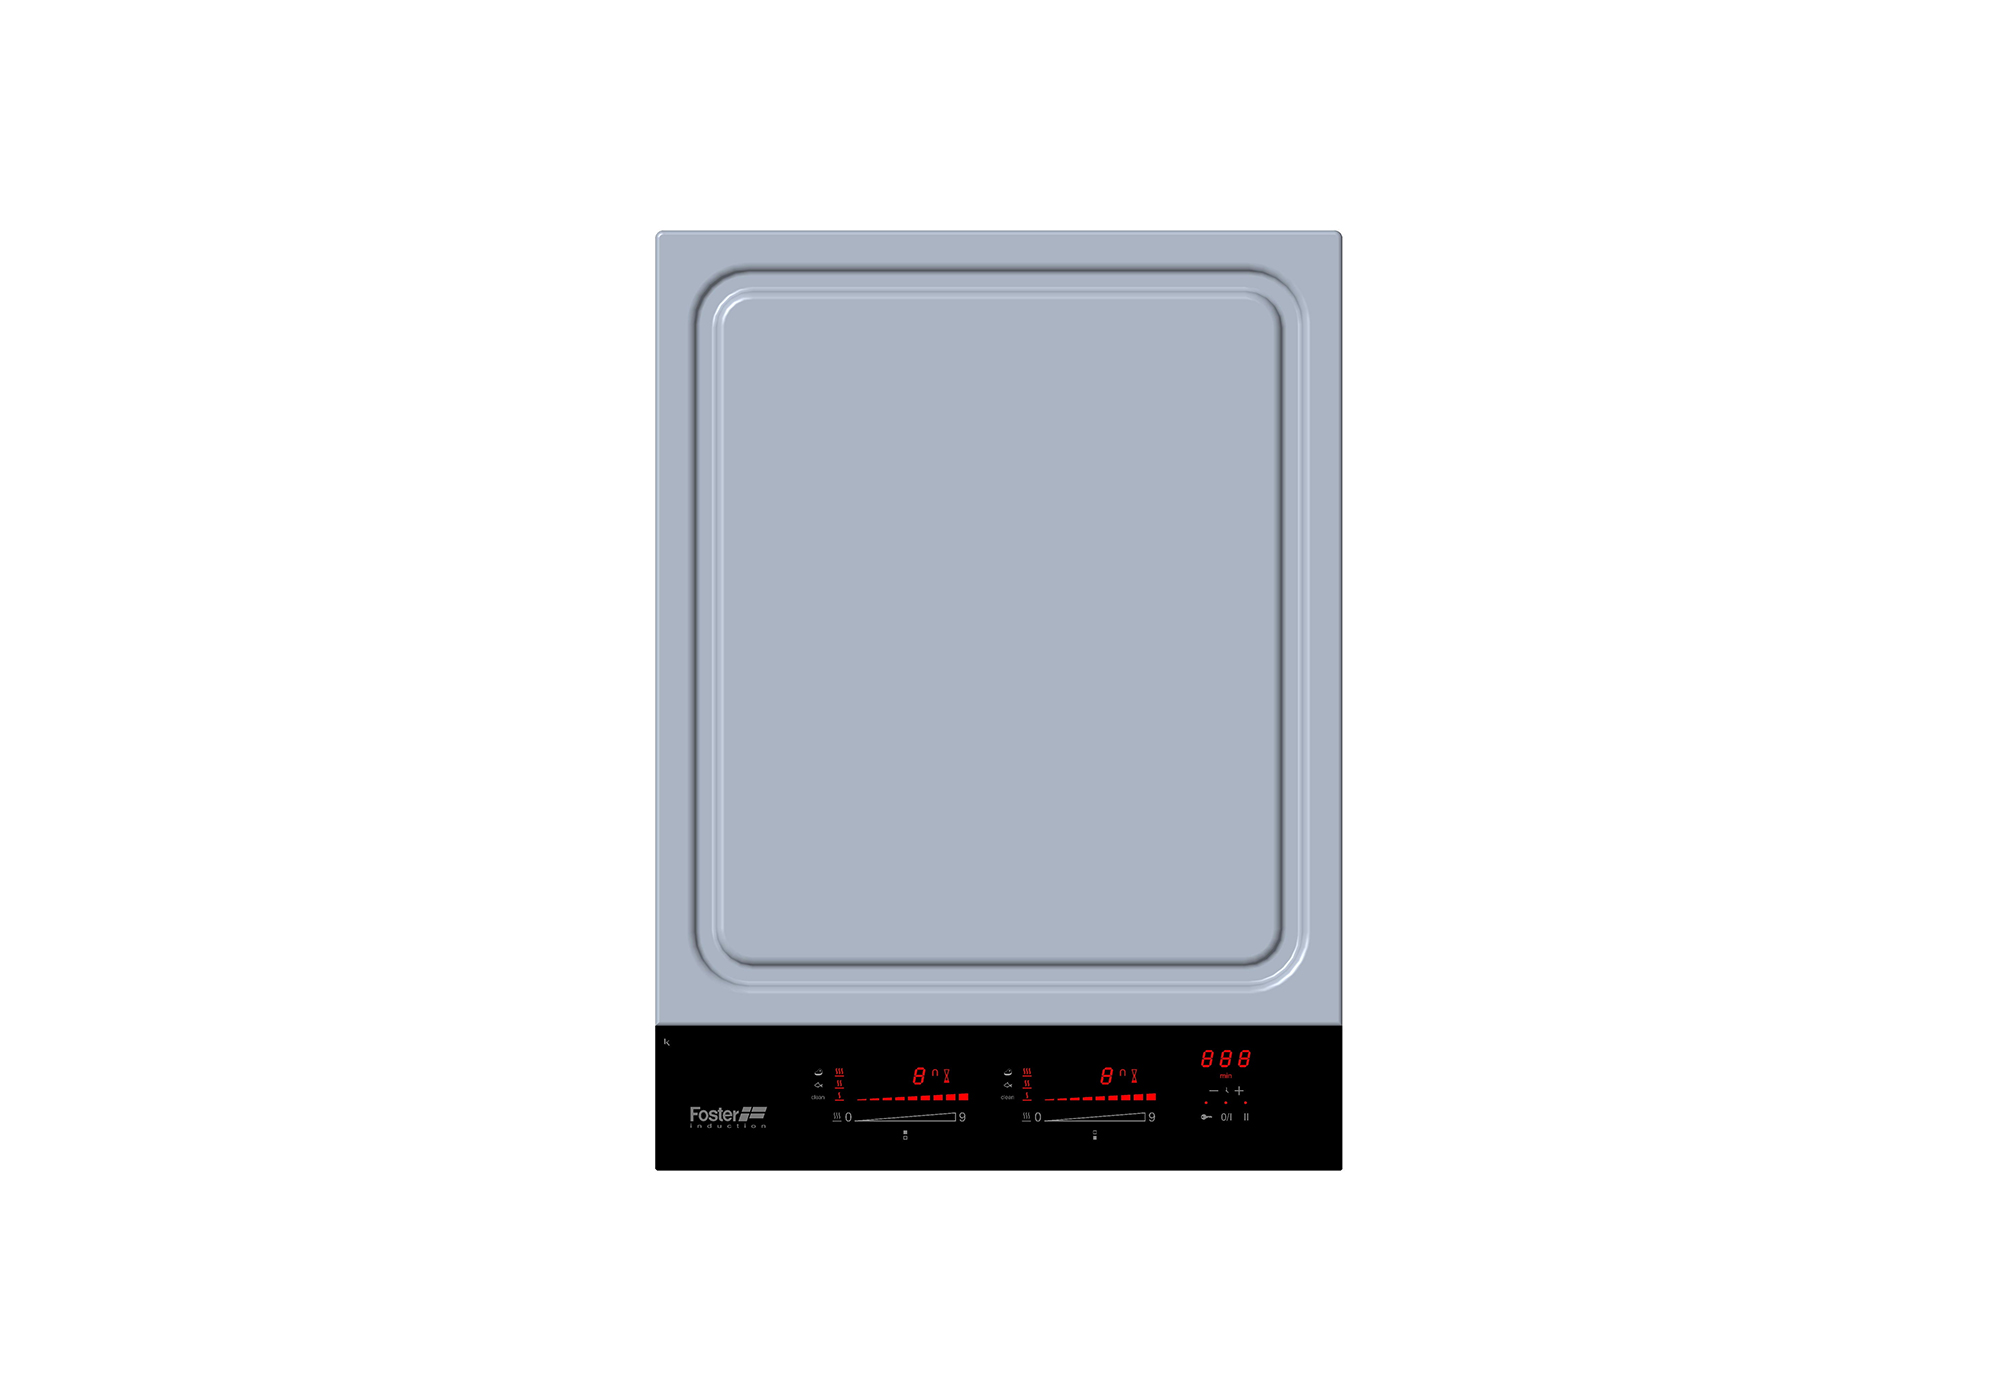 Table de cuisson S4000 Domino Induction